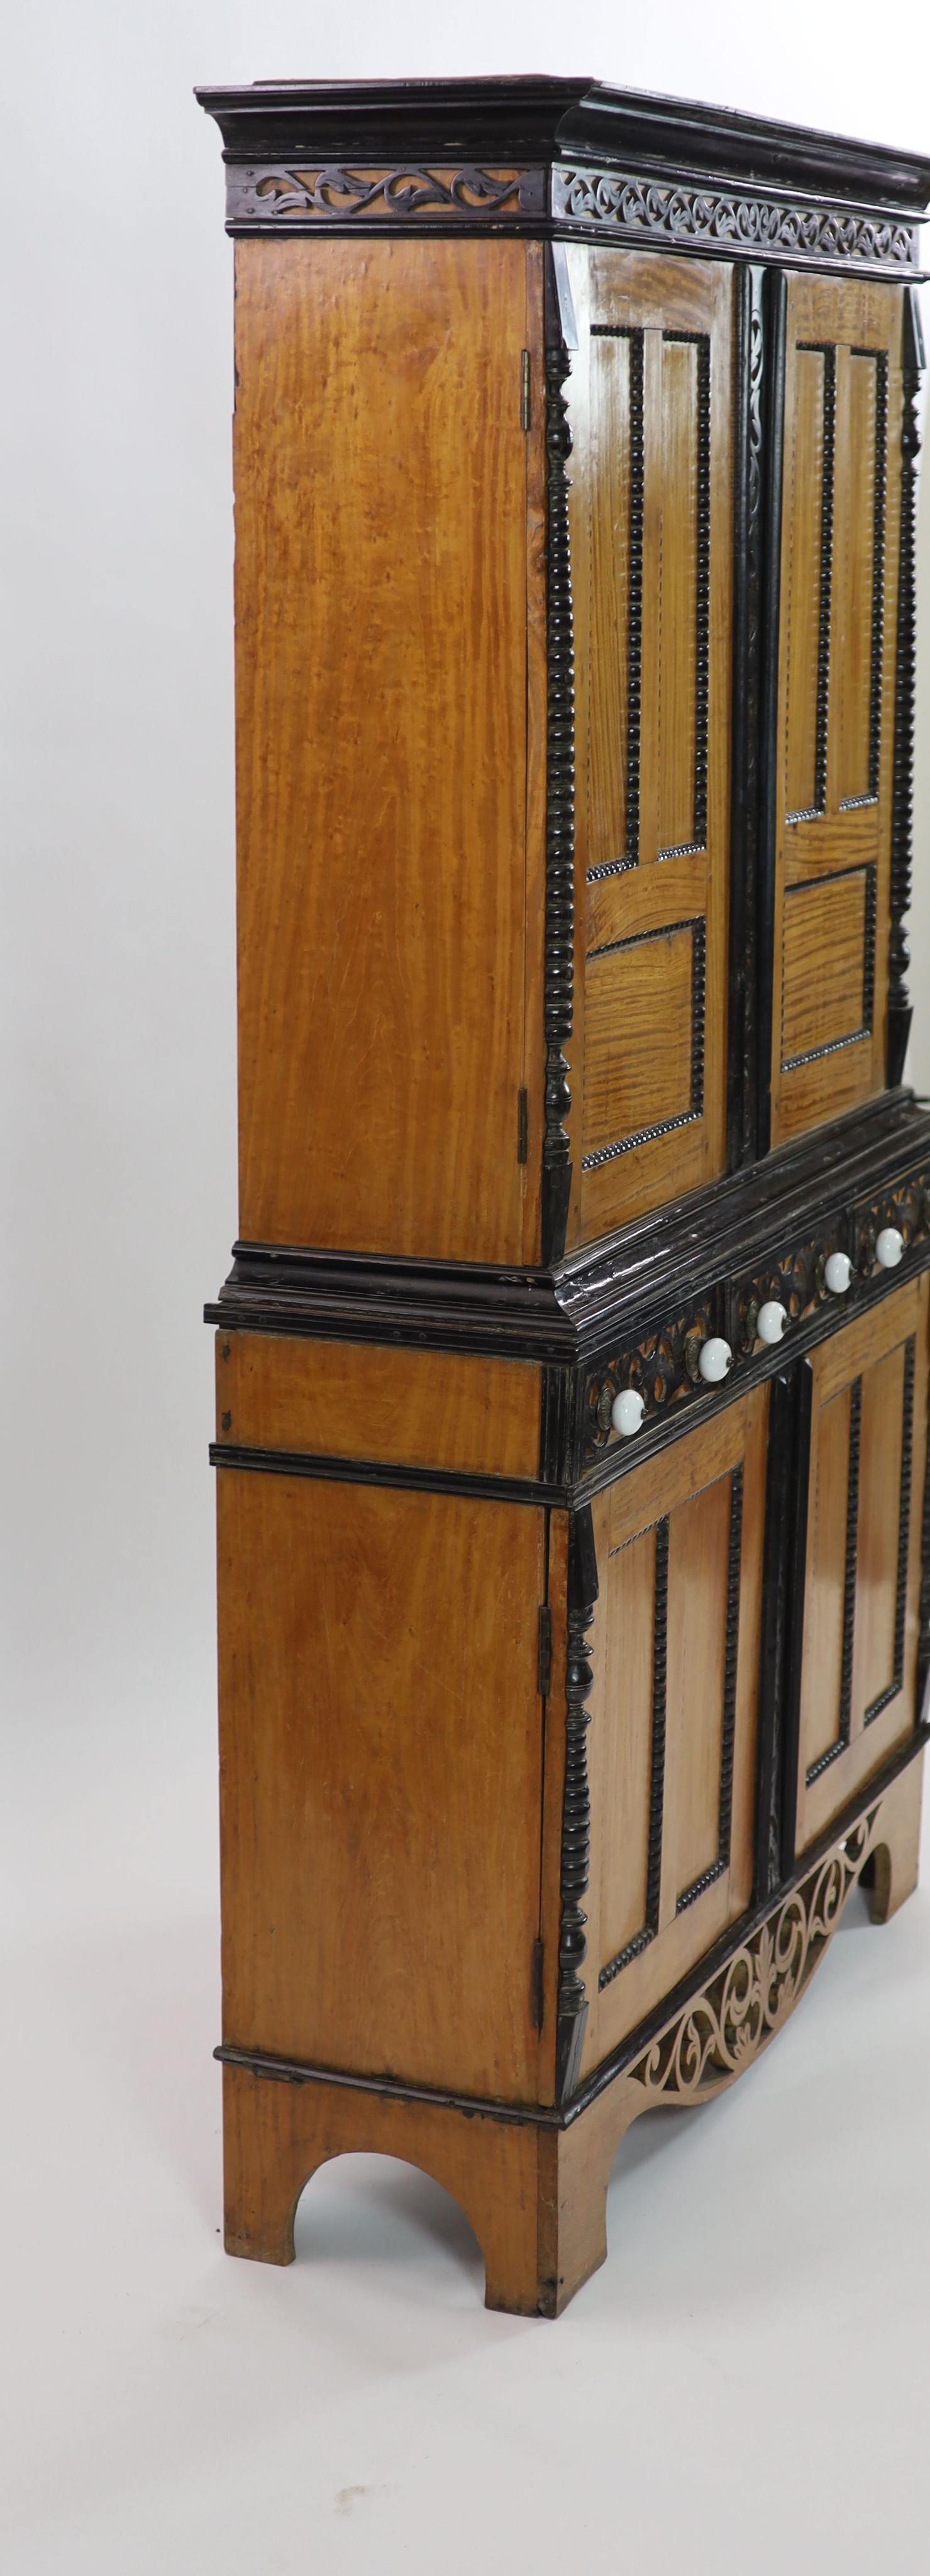 A mid 19th century Ceylonese satinwood and ebony side cabinet, H 194cm. W 120cm. D 37cm.